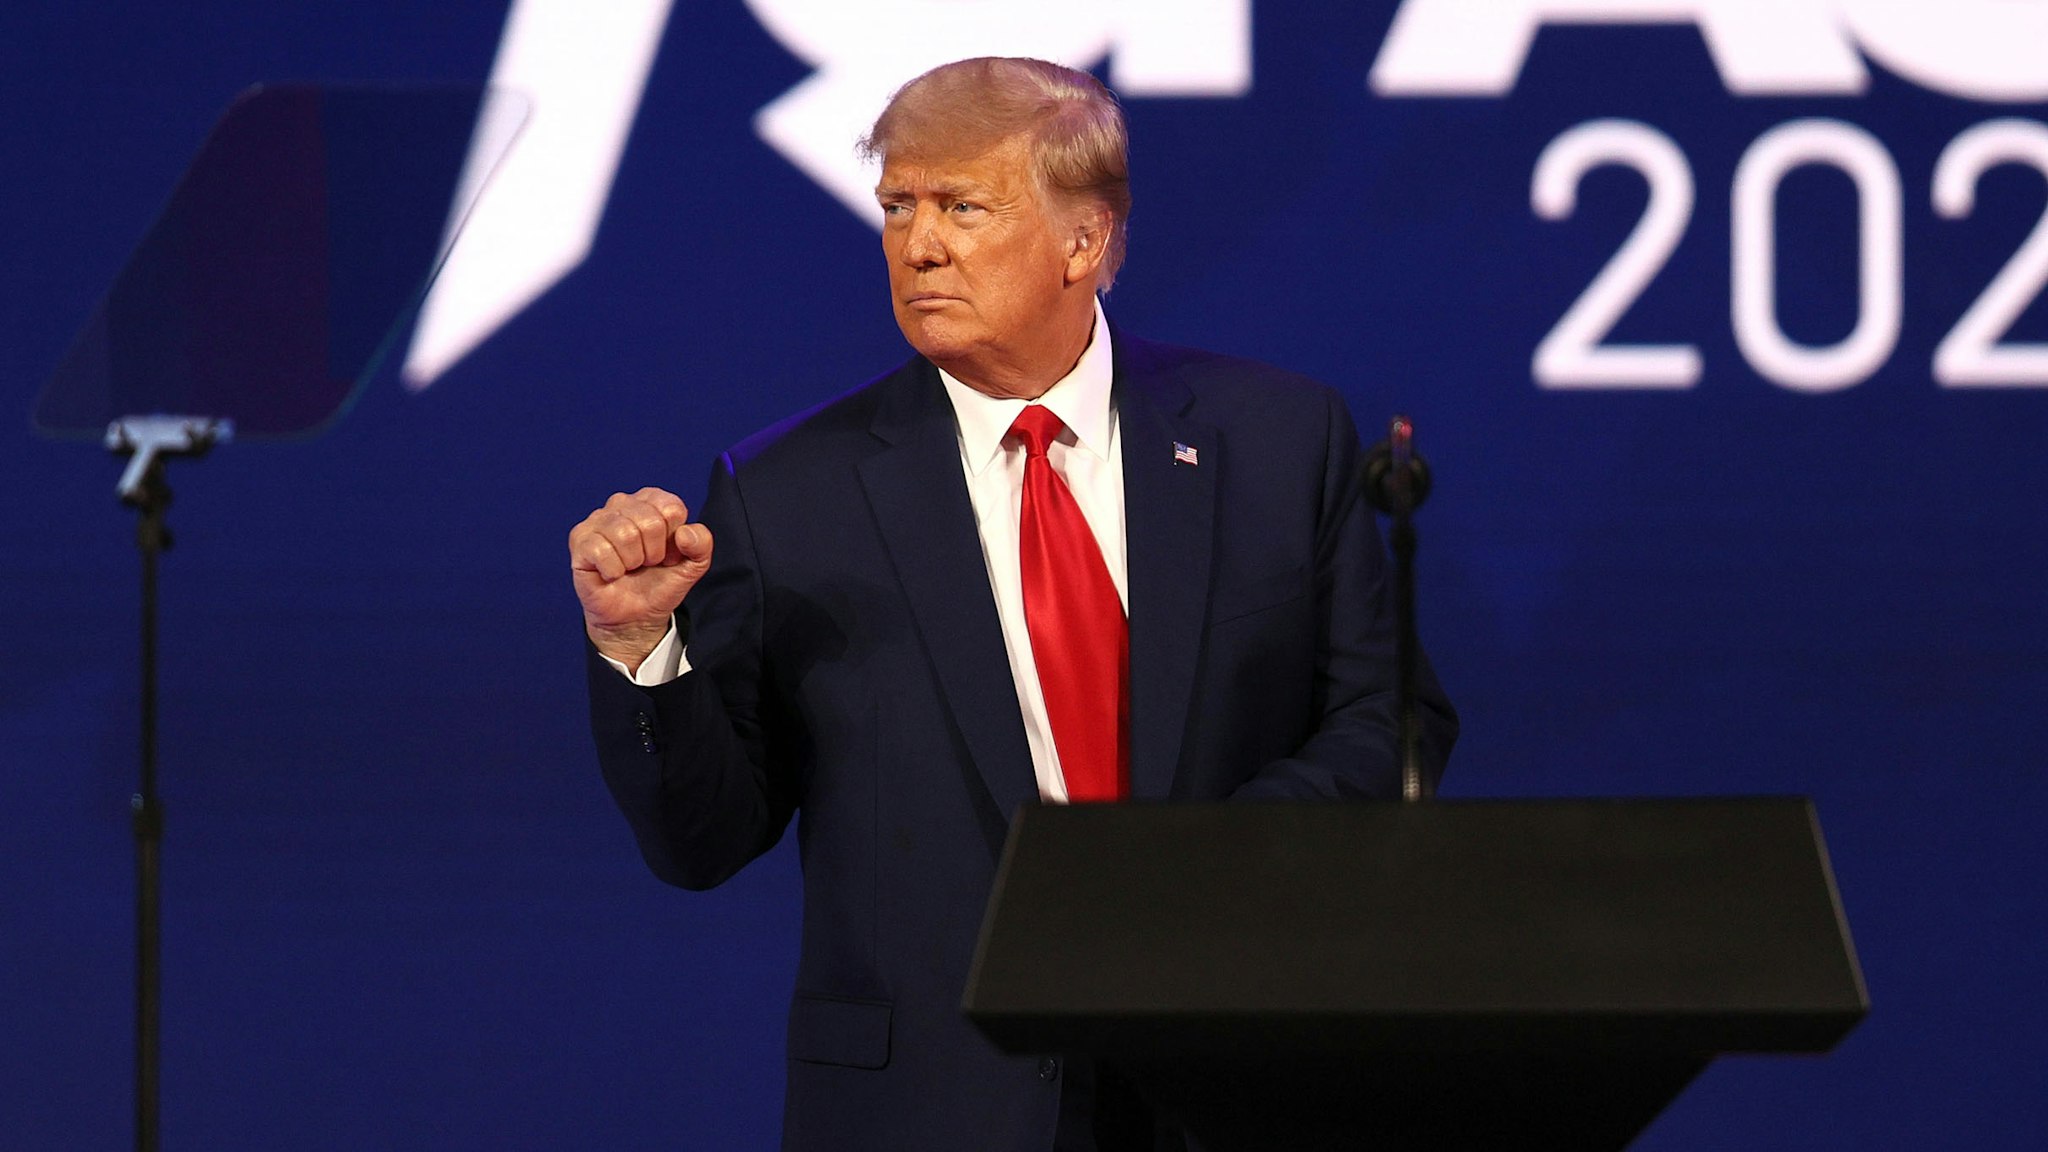 ORLANDO, FLORIDA - FEBRUARY 28: Former President Donald Trump addresses the Conservative Political Action Conference held in the Hyatt Regency on February 28, 2021 in Orlando, Florida. Begun in 1974, CPAC brings together conservative organizations, activists, and world leaders to discuss issues important to them.